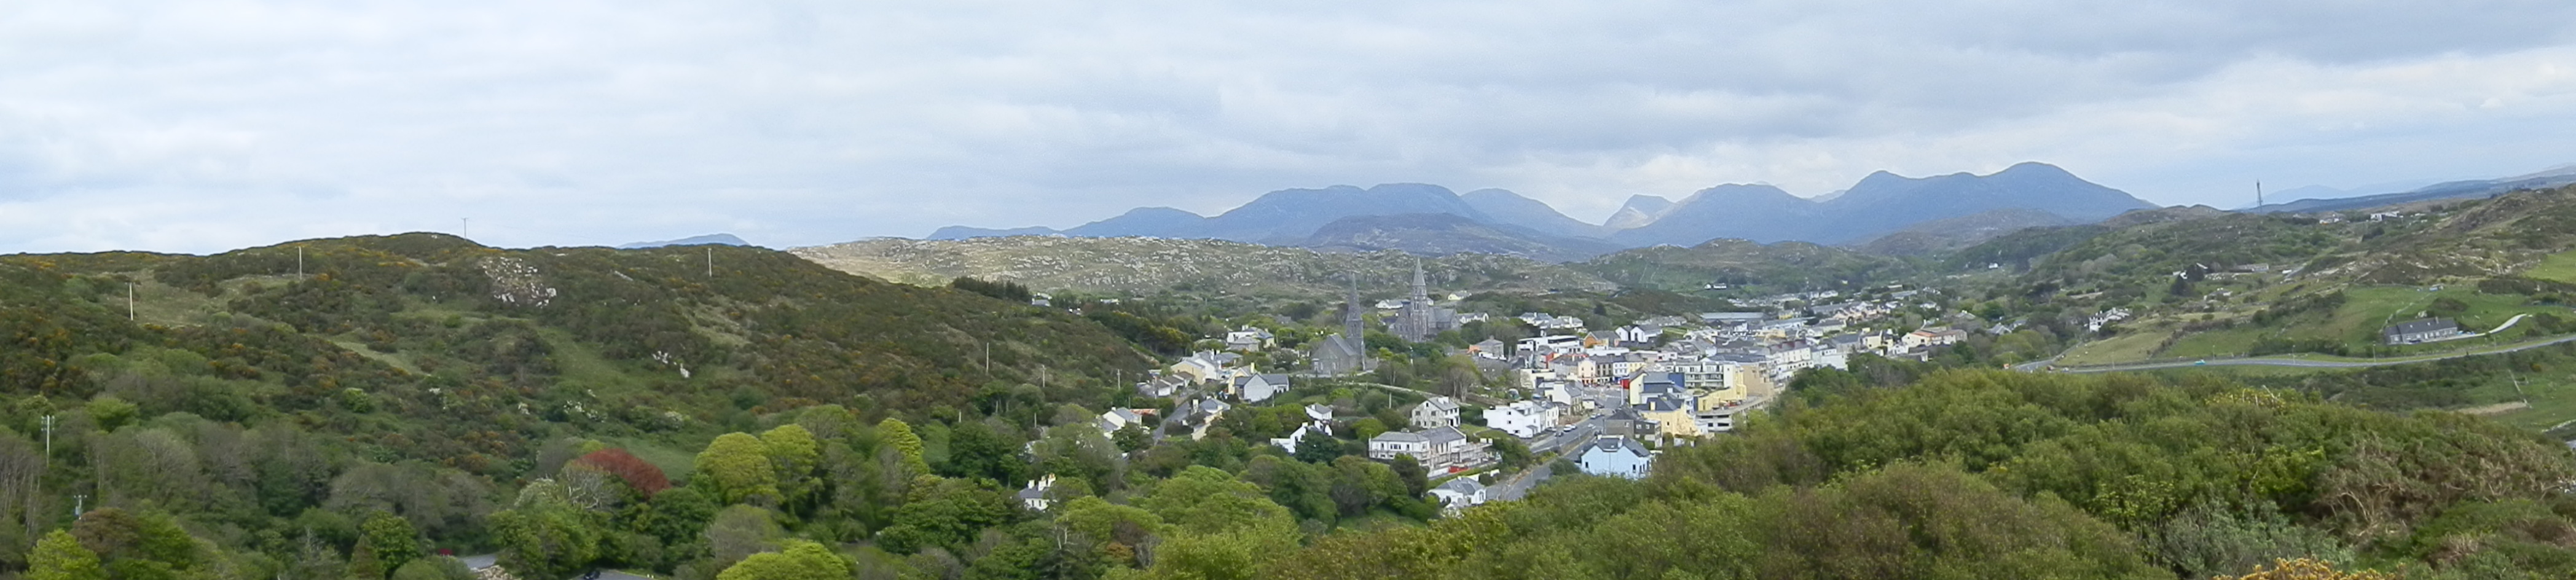 Postcard Perfect View of Clifden: Co Galway